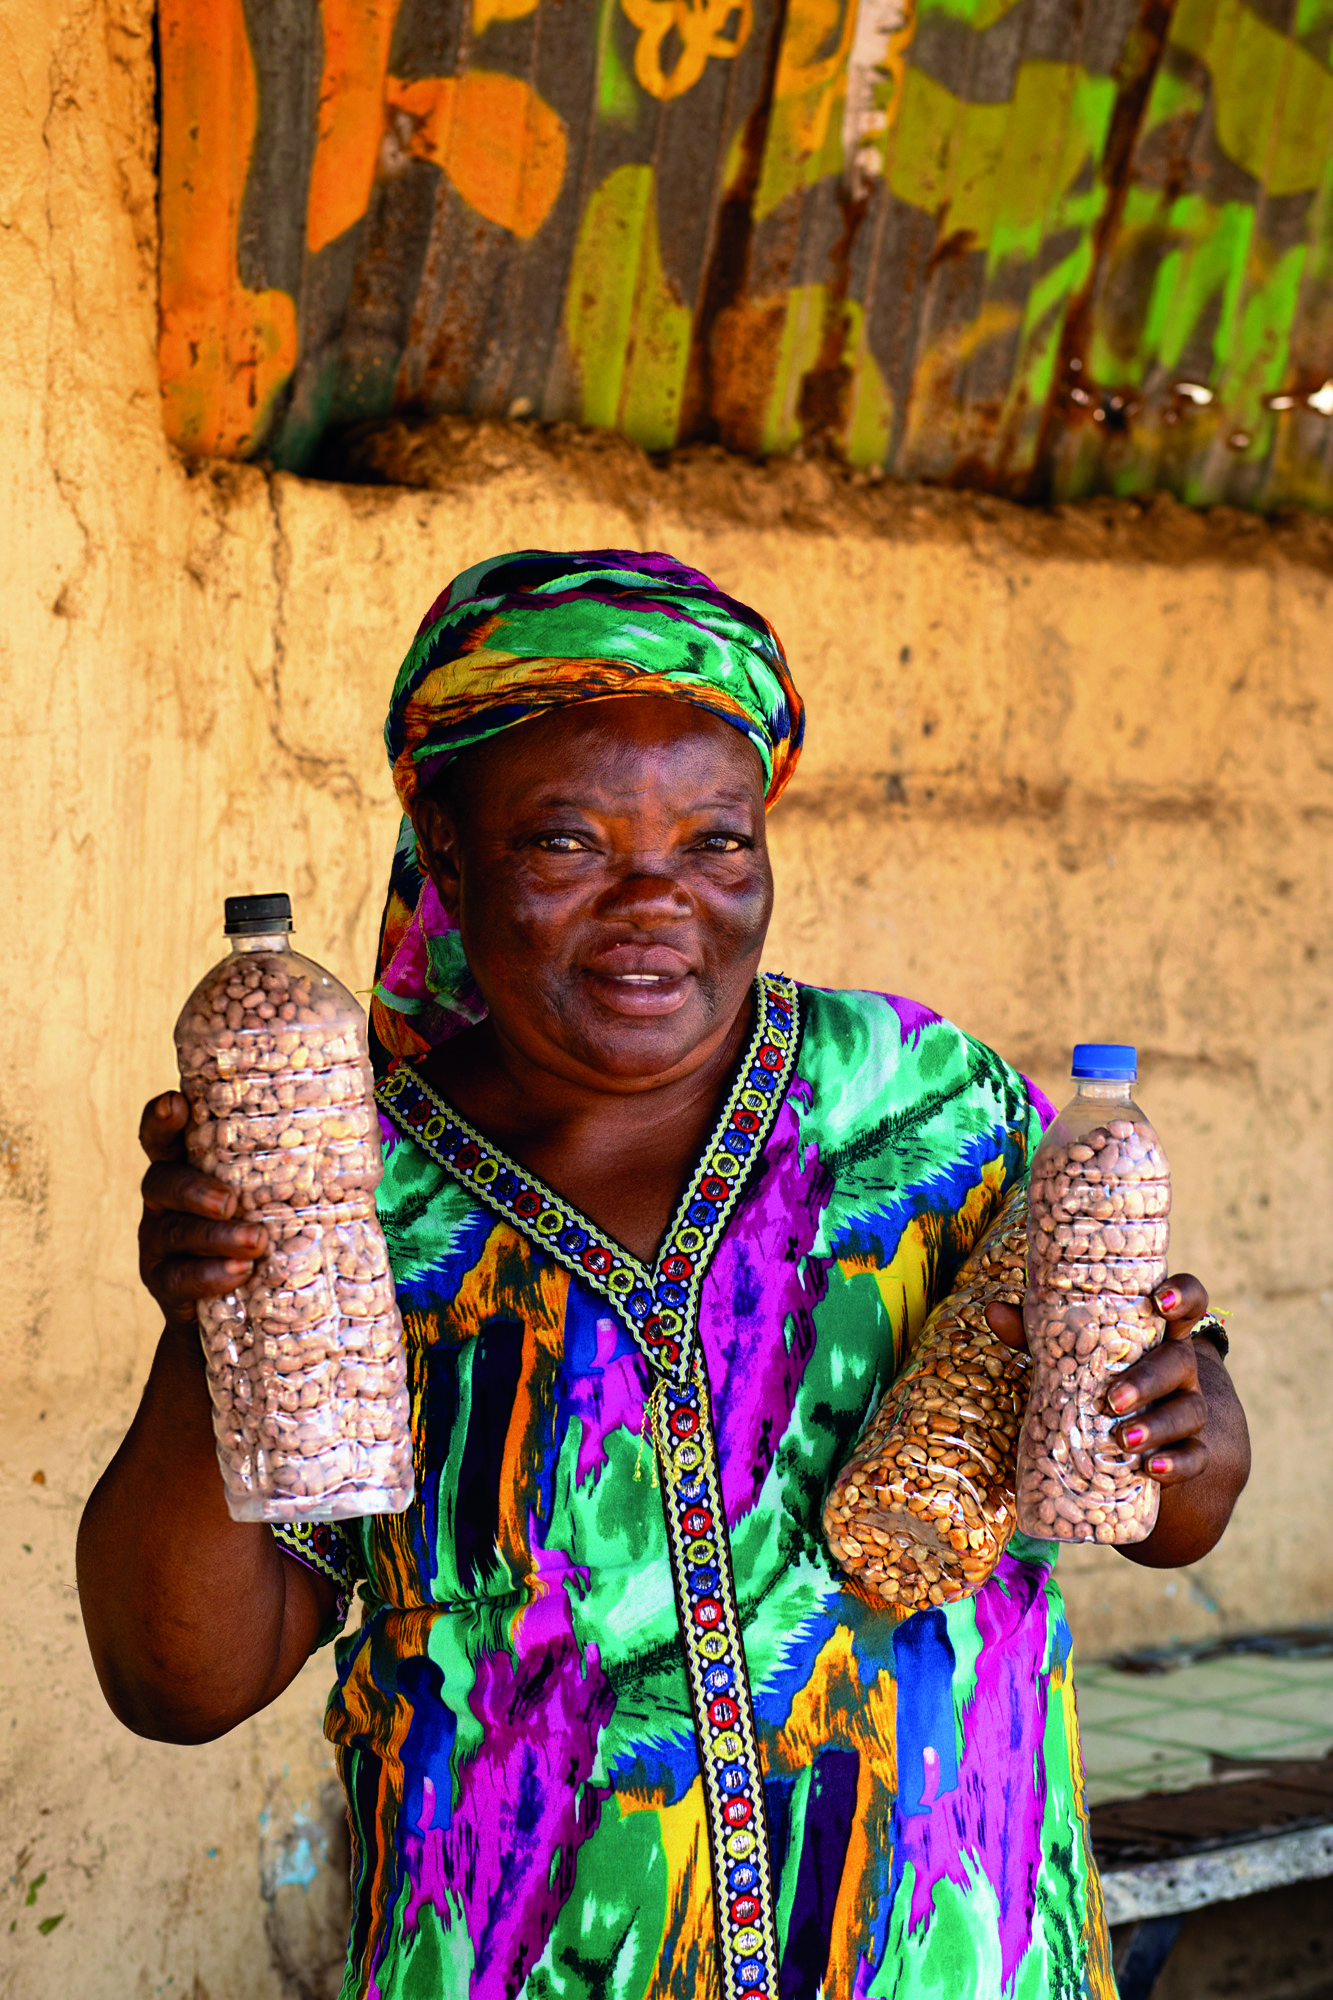 In Bakau, a town along Gambia’s Atlantic coast, Florence Onwuegble, of Nigeria, is among the many selling groundnuts—fresh, roasted, salted or sweet. 